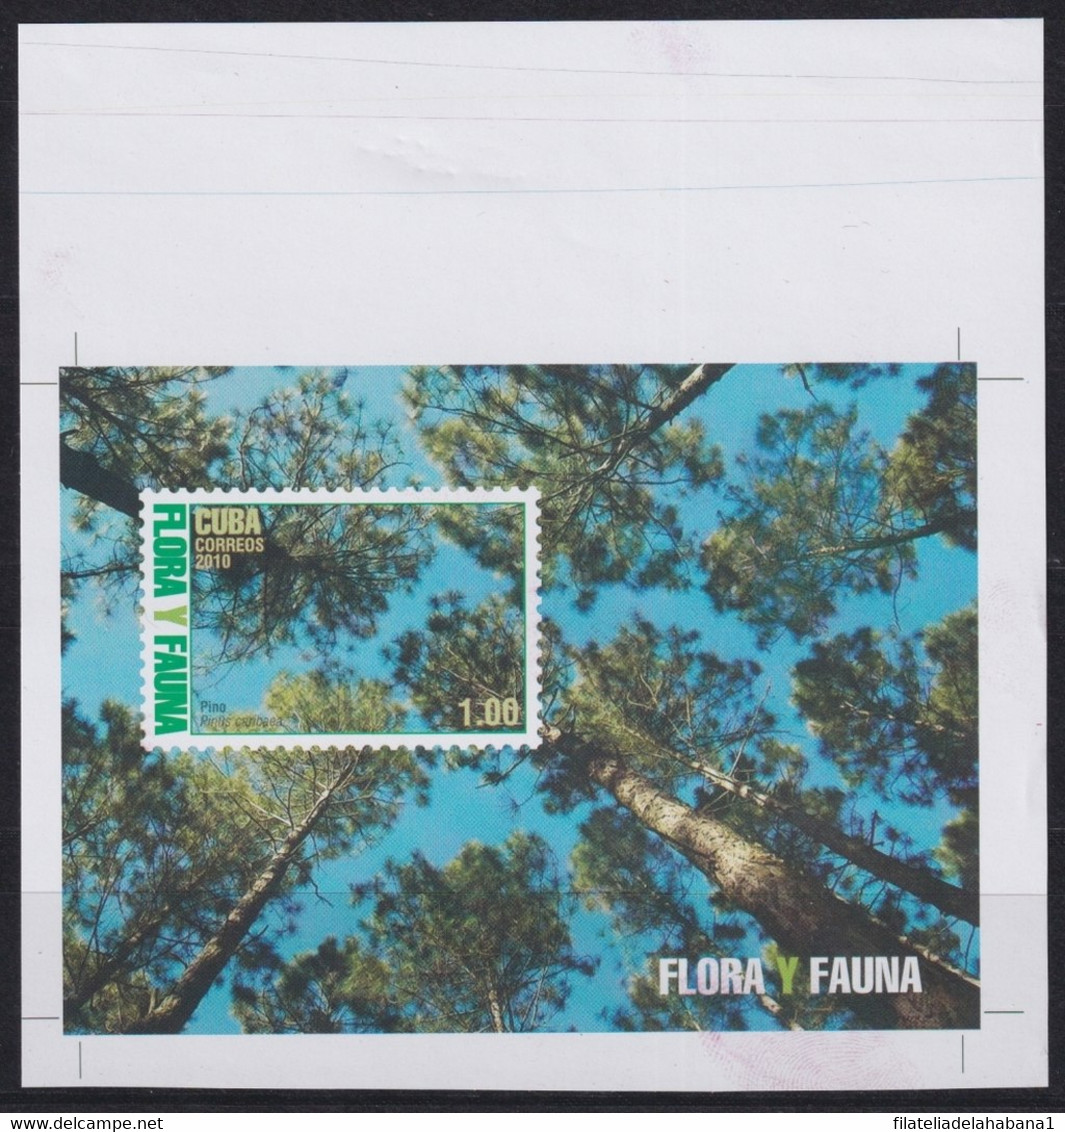 2010.667 CUBA MNH 2010 IMPERFORATED PROOF SHEET FLORA & FAUNA TREE - Imperforates, Proofs & Errors